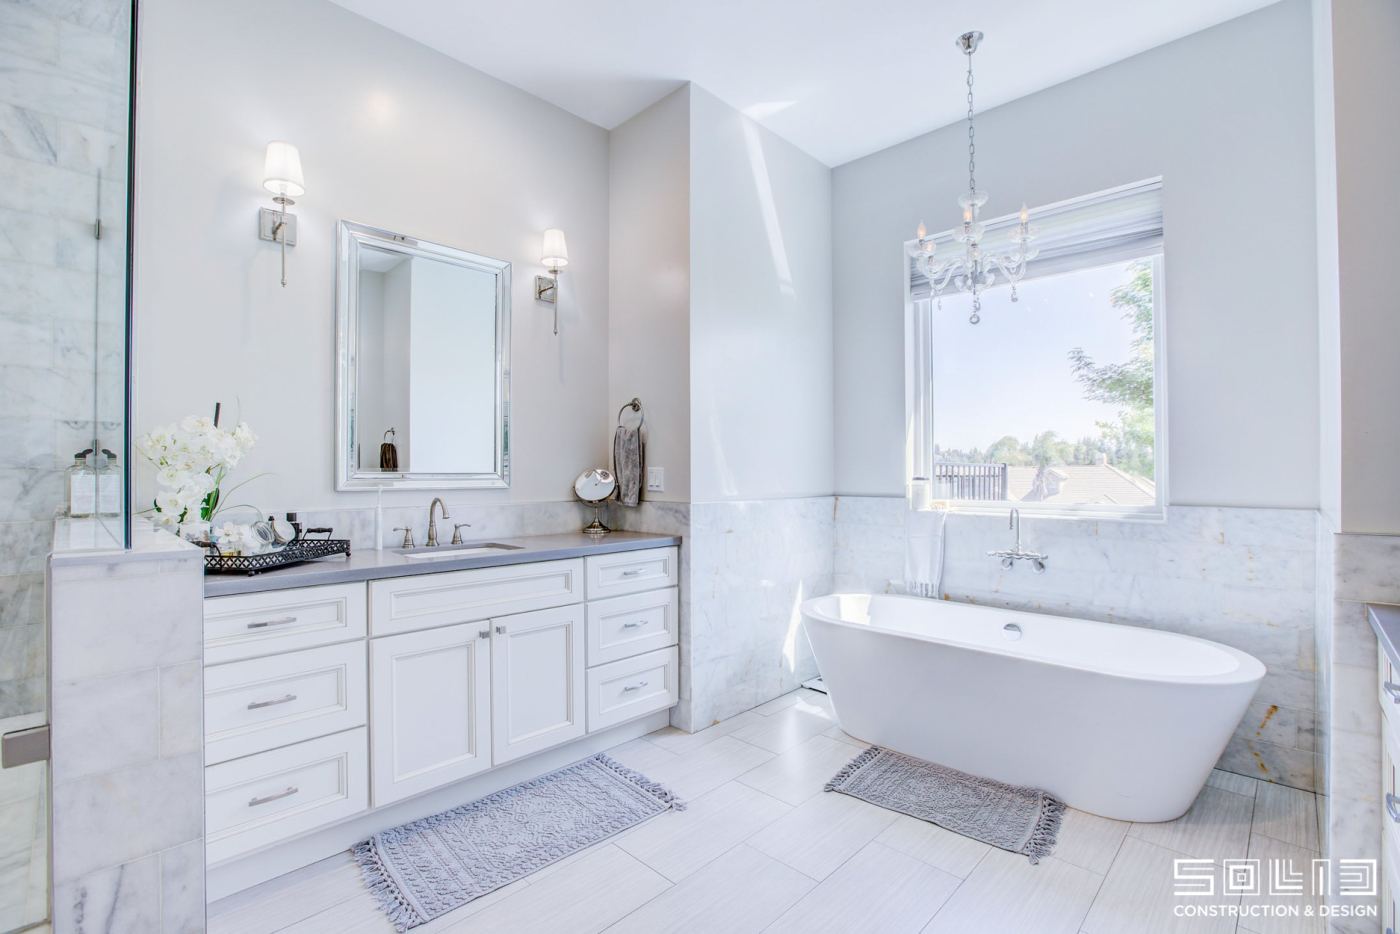 Get Your Sacramento Bathroom Remodeling Done Right